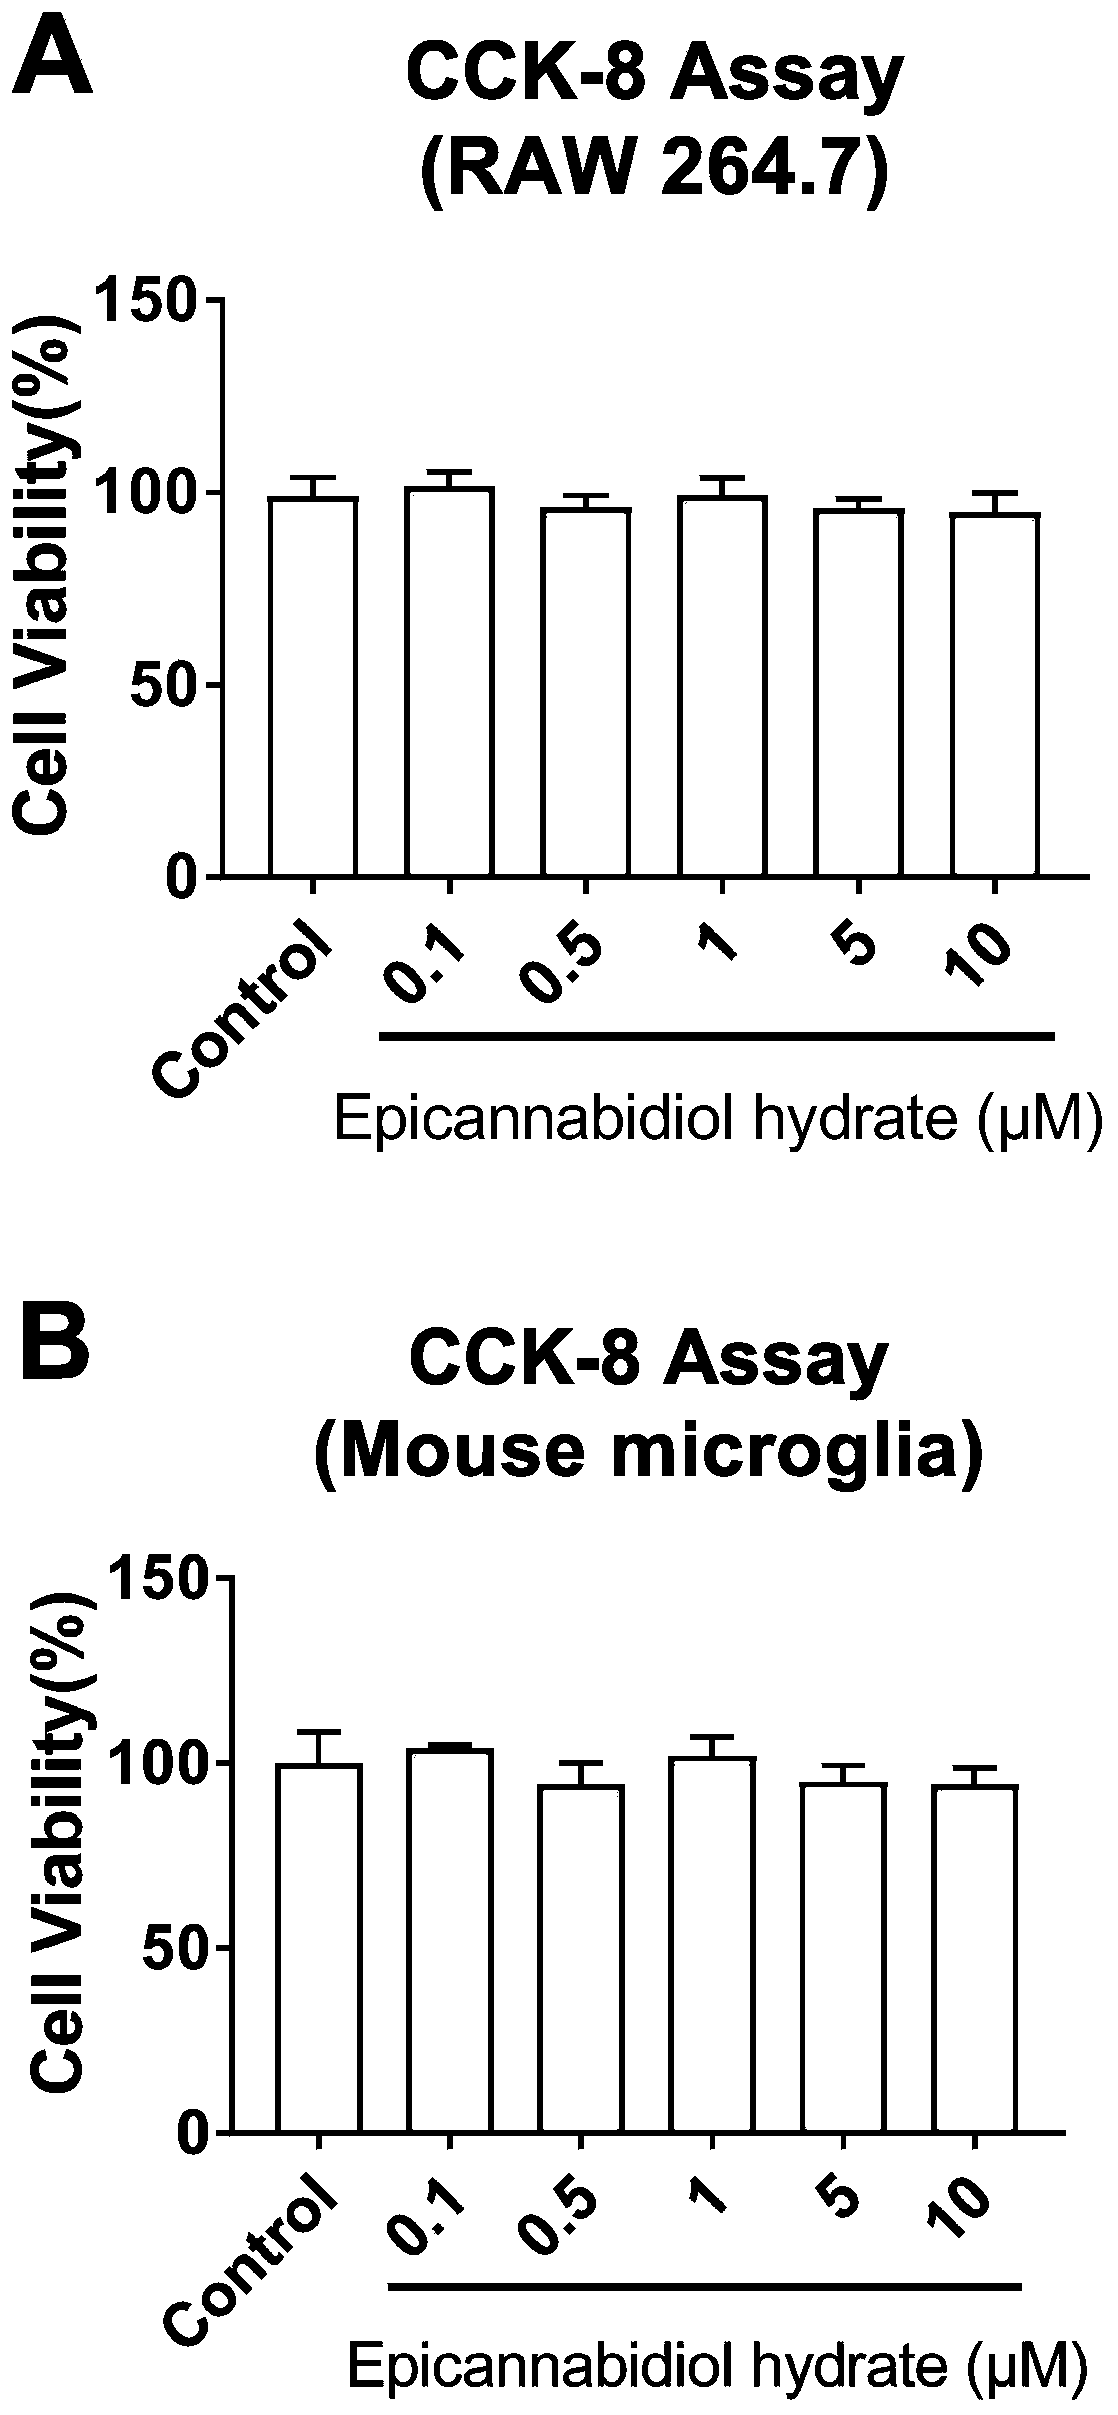 Application of epicannabidiol hydrate in preparing drugs for preventing and/or curing brain injuries and pharmaceutical composition comprising epicannabidiol hydrate